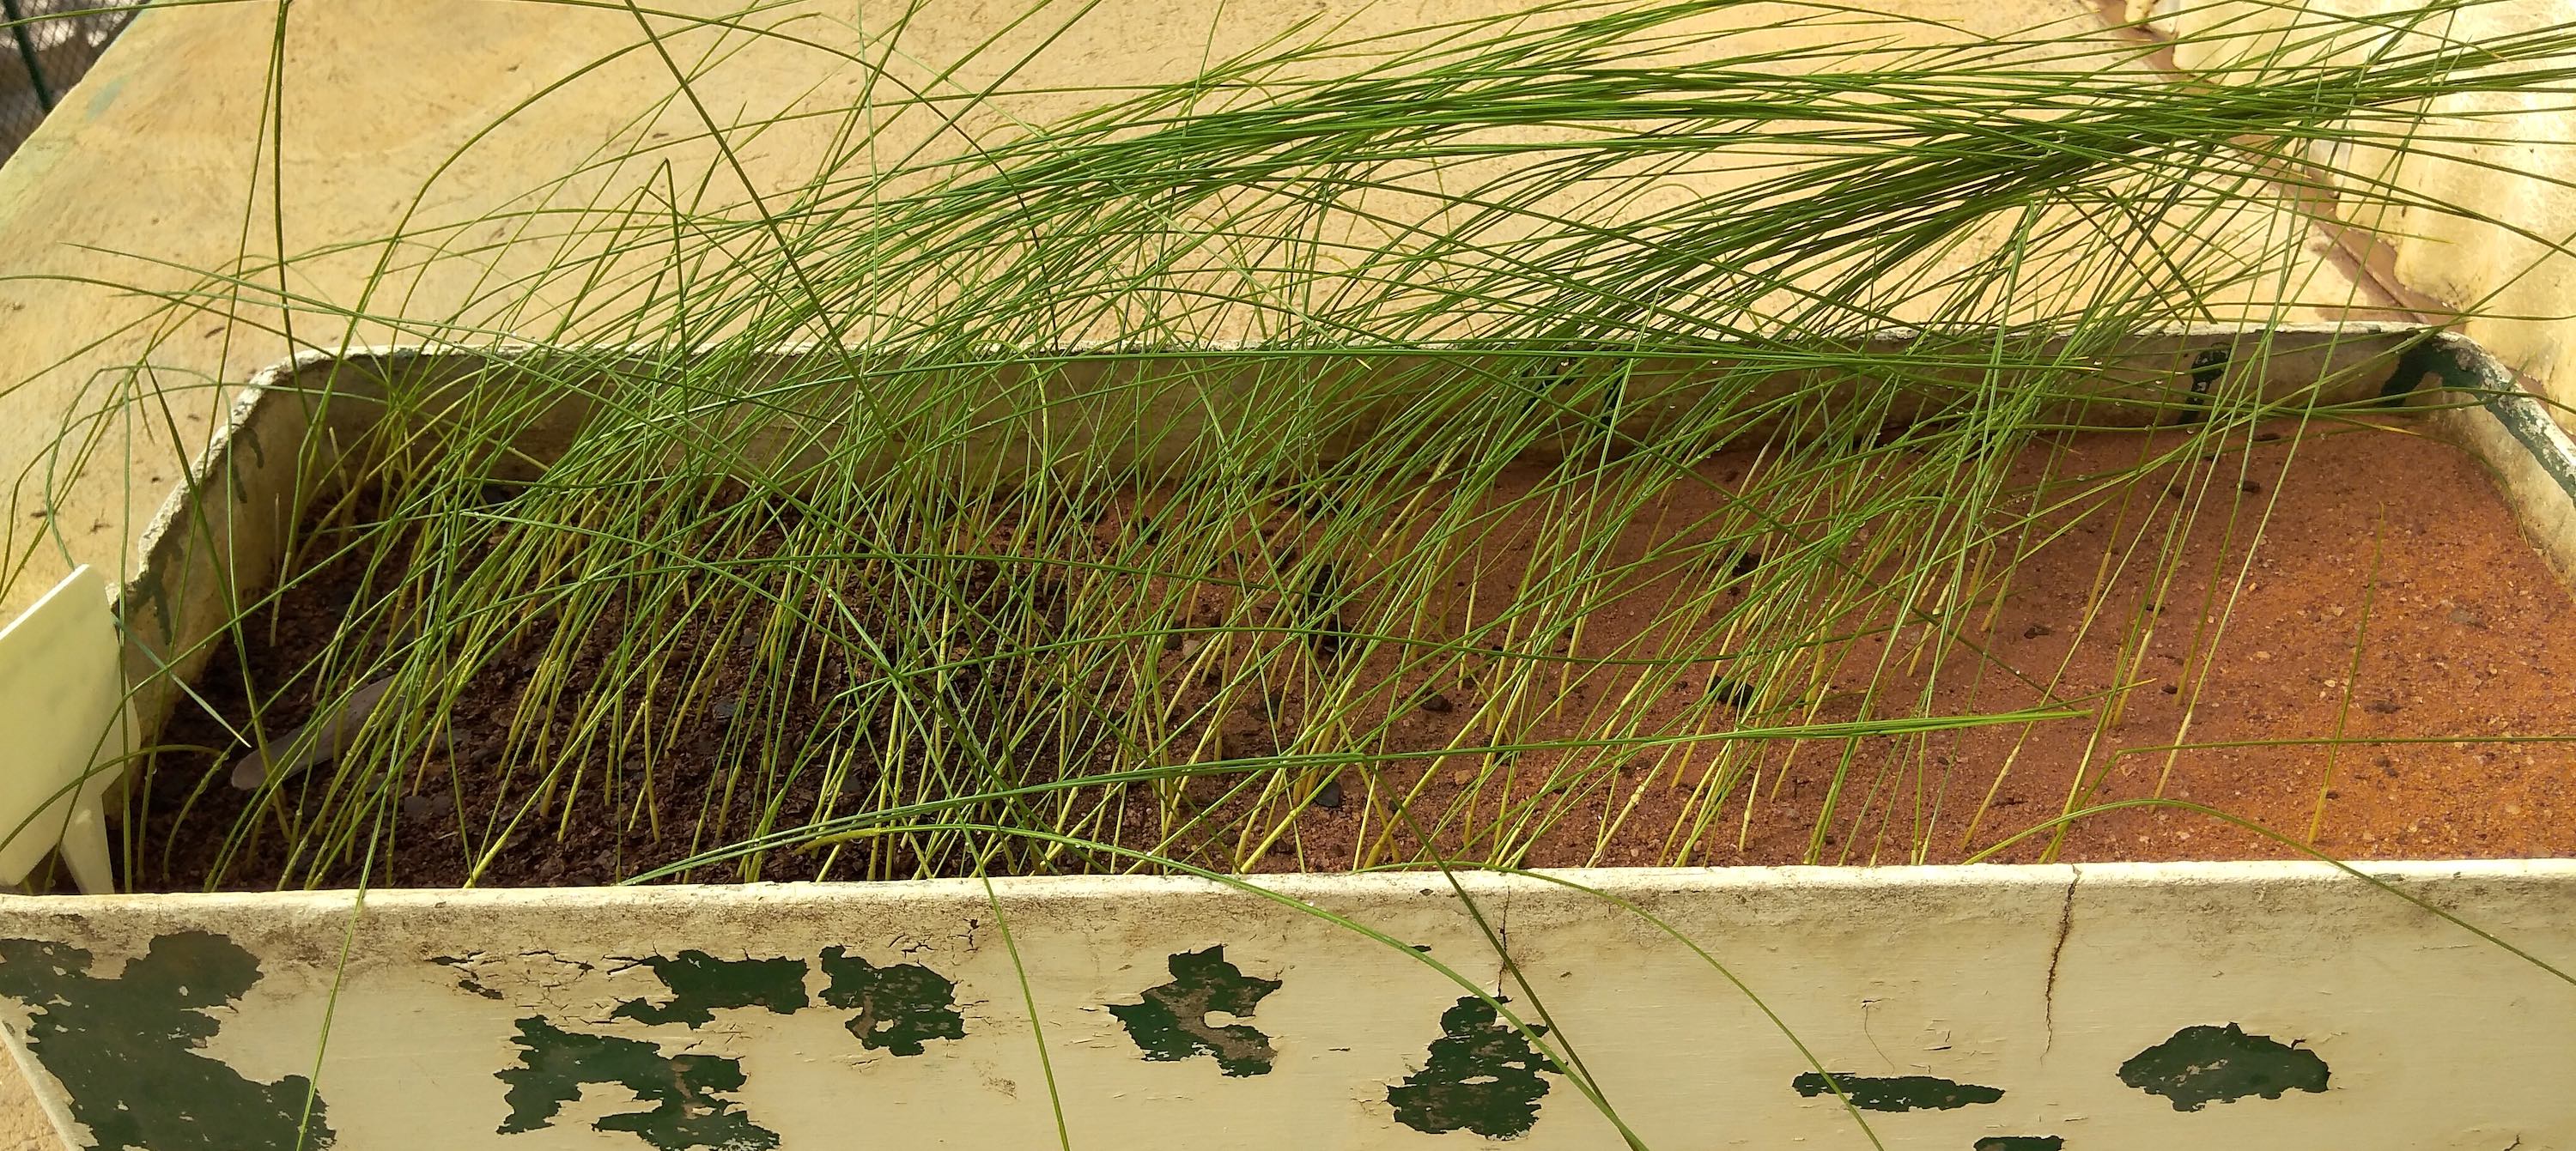 A planter box with grass-like plants within.